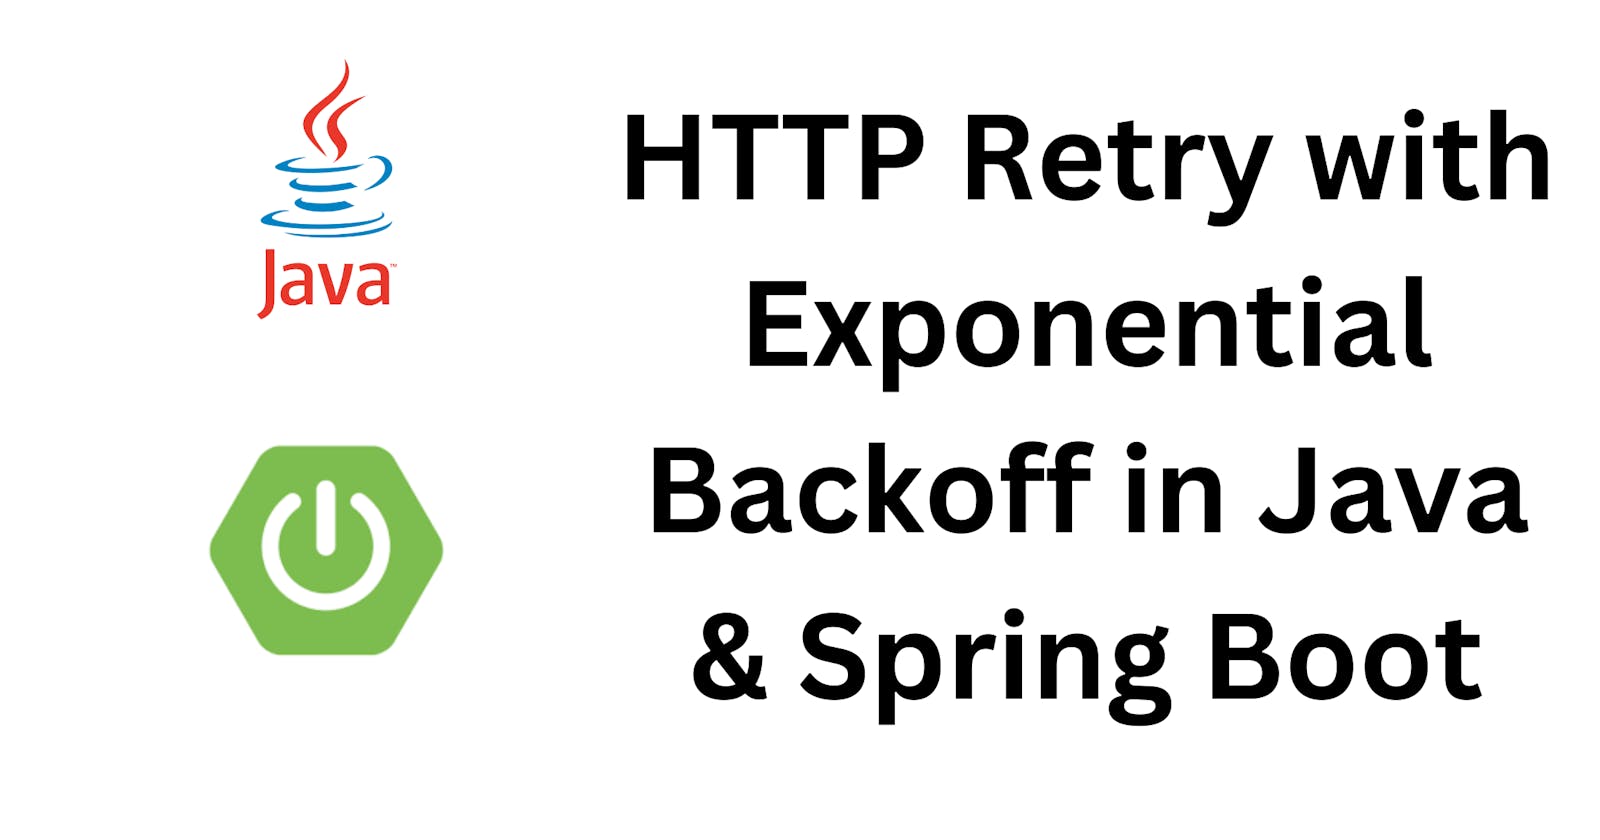 HTTP Retry with Exponential Backoff in Java and Spring Boot